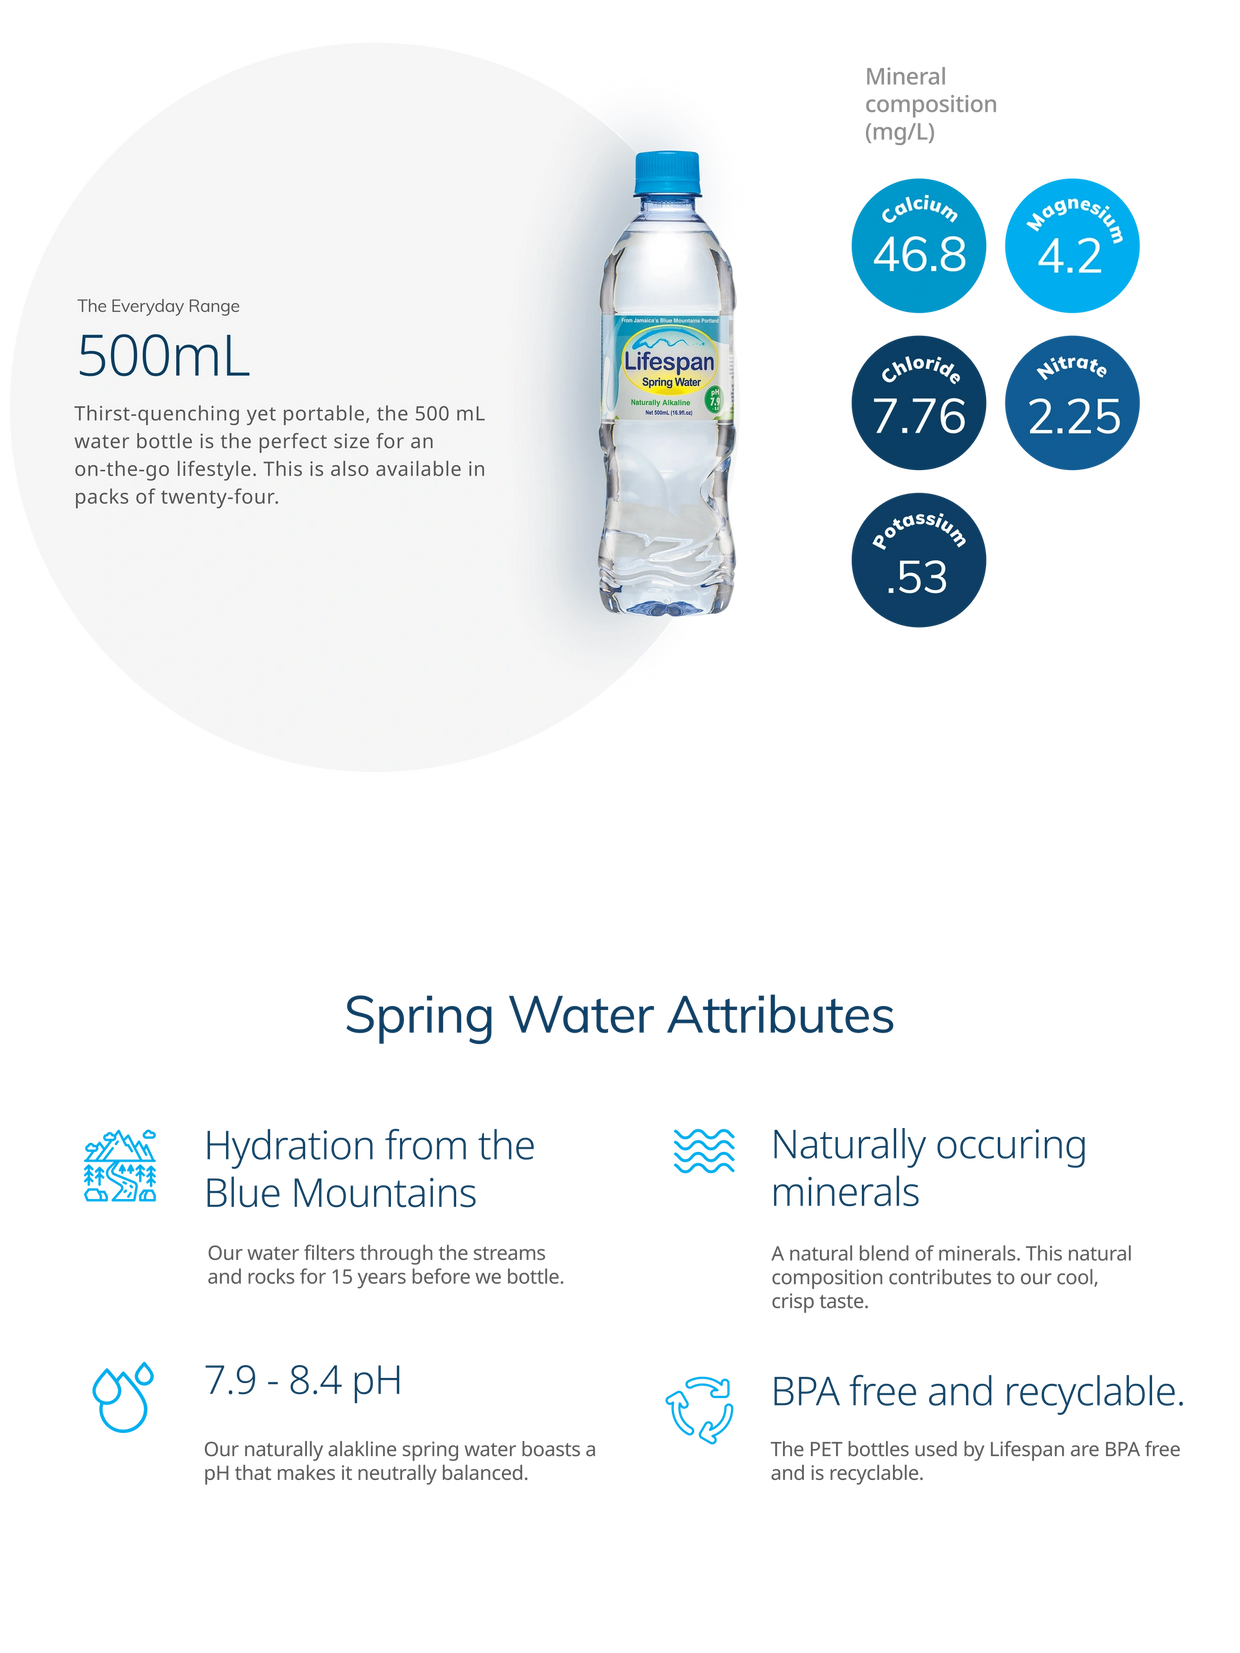 The 500ml is thirst-quenching yet portable.